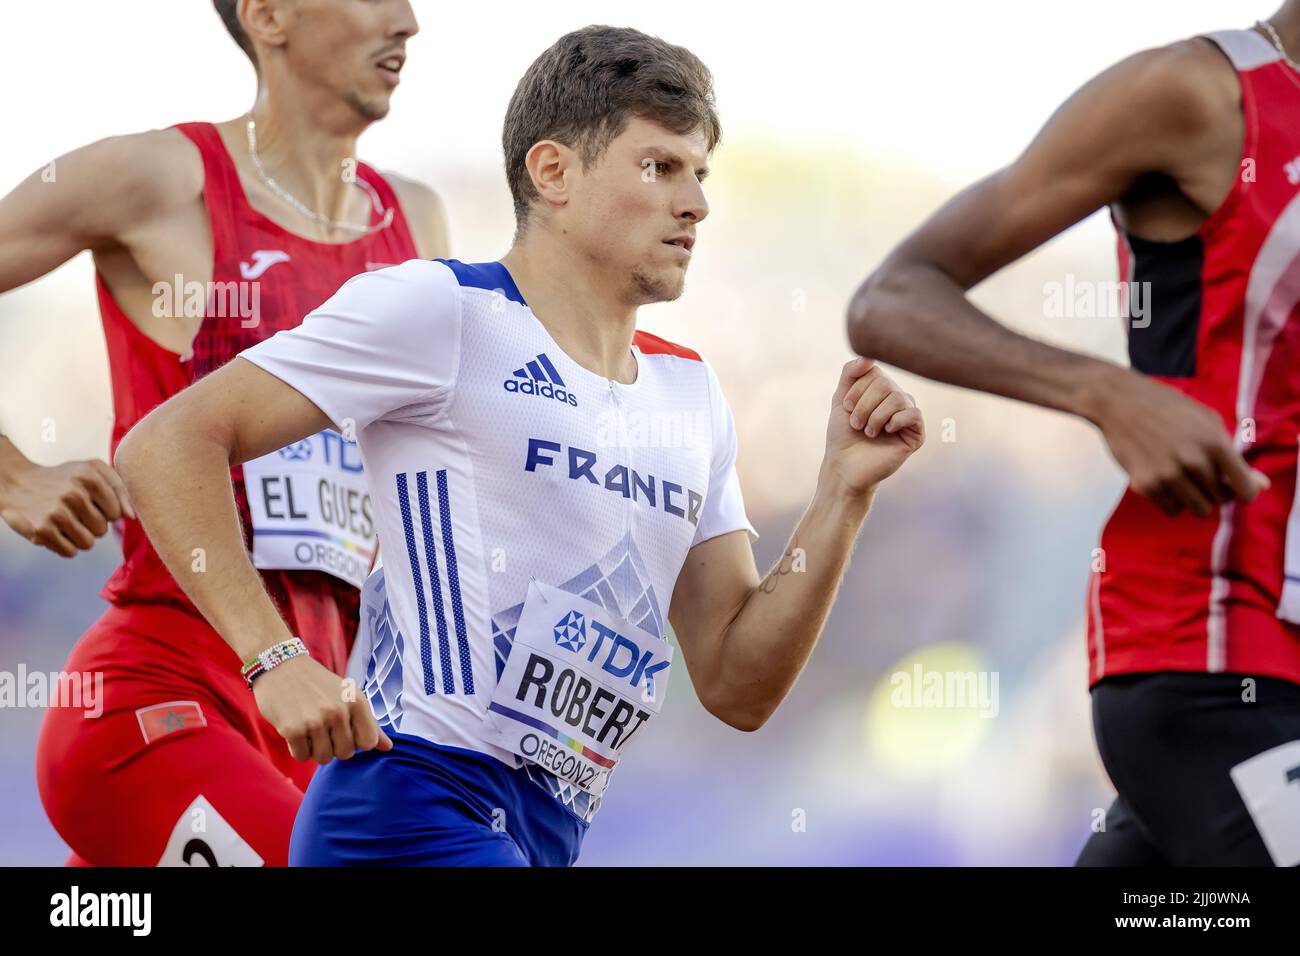 2022-07-22 04:19:03 EUGENE - Benjamin Robert (FRA) in action during the 800 meters semifinal on the seventh day of the World Athletics Championships at Hayward Field stadium. ANP ROBIN VAN LONKHUIJSEN netherlands out - belgium out Stock Photo